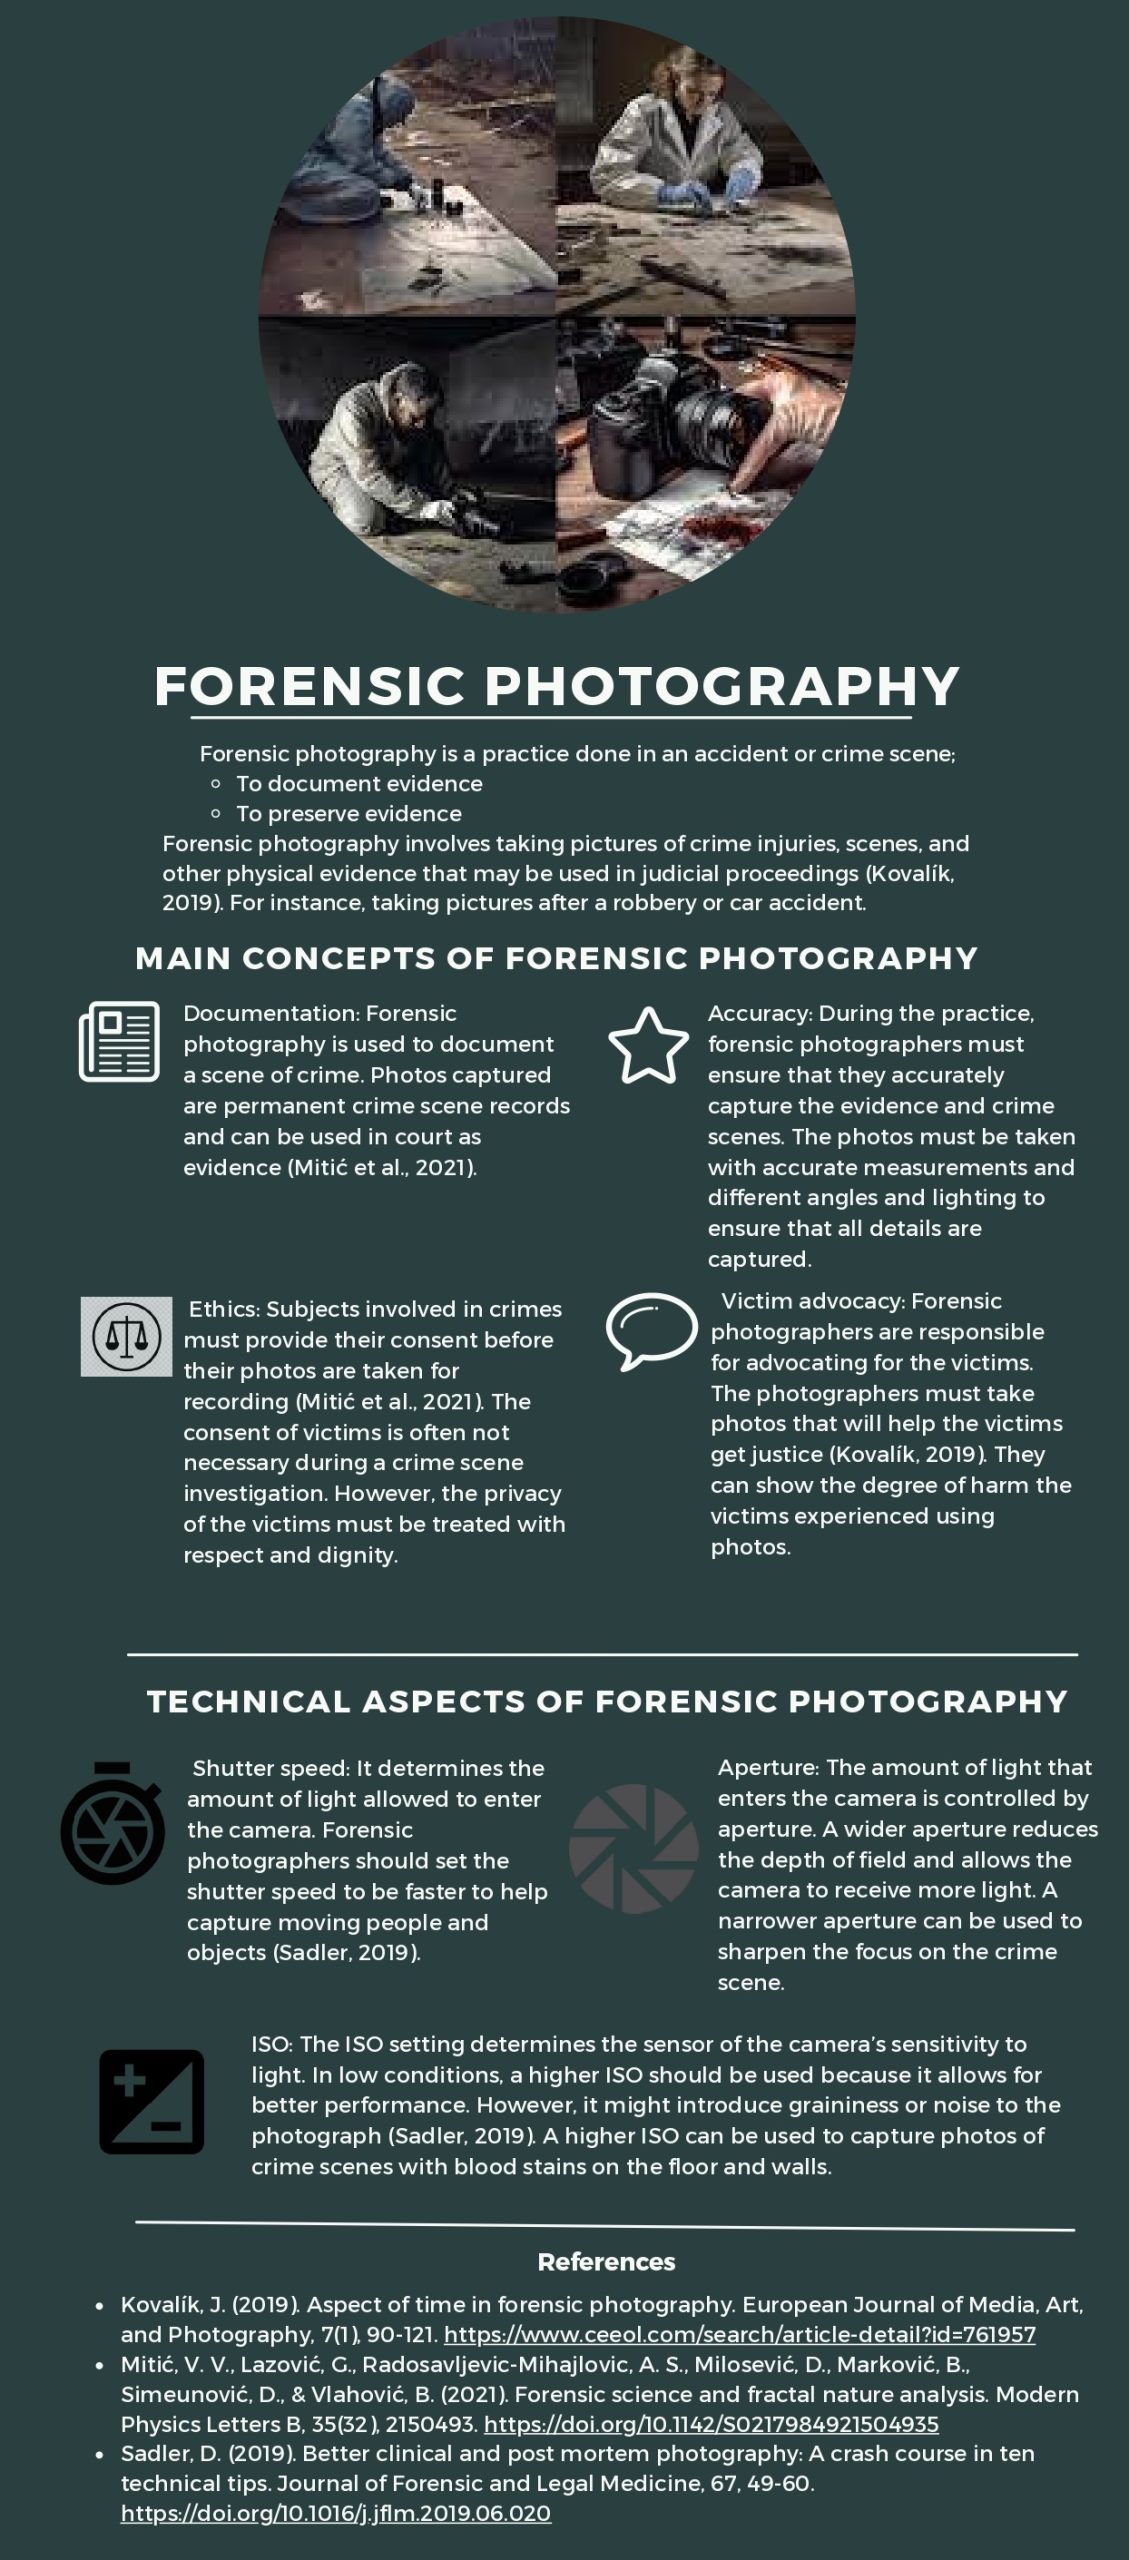 Create an infographic to highlight the main concepts of forensic photography. Address the concerns of consent and victim advocacy. Present the subjects of shutter speed, ISO, and aperture. Provide illustrative examples